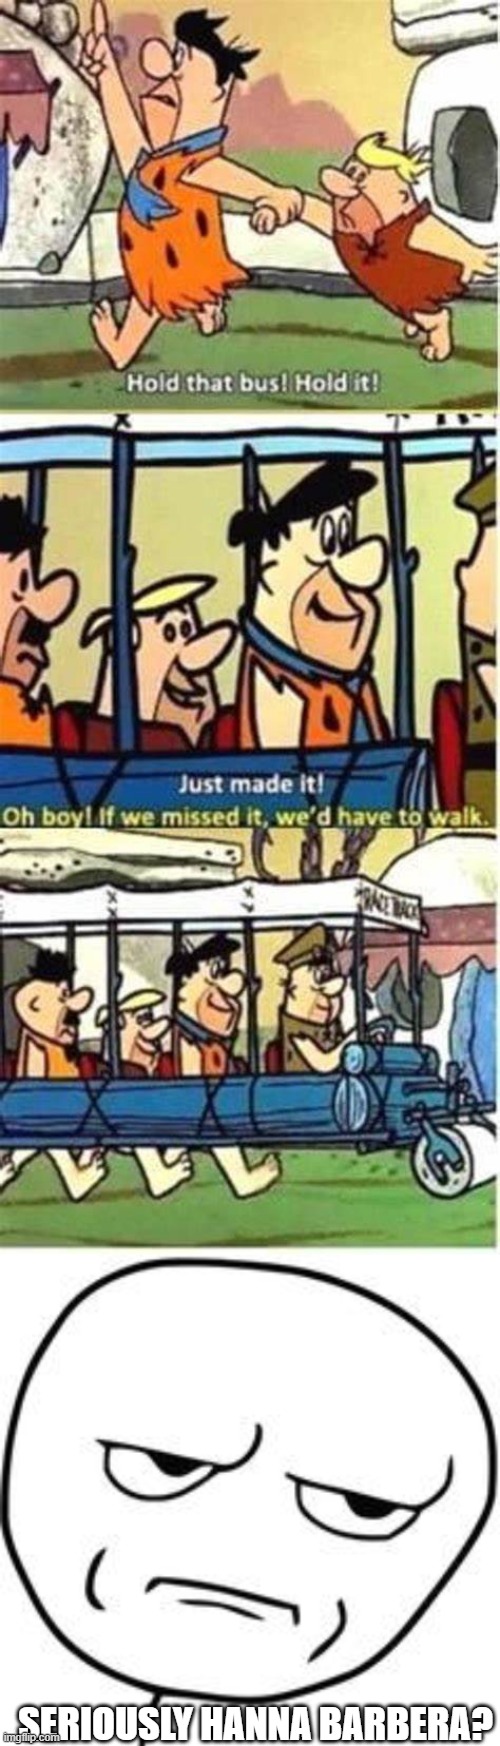 someday everyone told me this logic is going too far |  SERIOUSLY HANNA BARBERA? | image tagged in are you kidding me,flintstones,cartoon logic | made w/ Imgflip meme maker